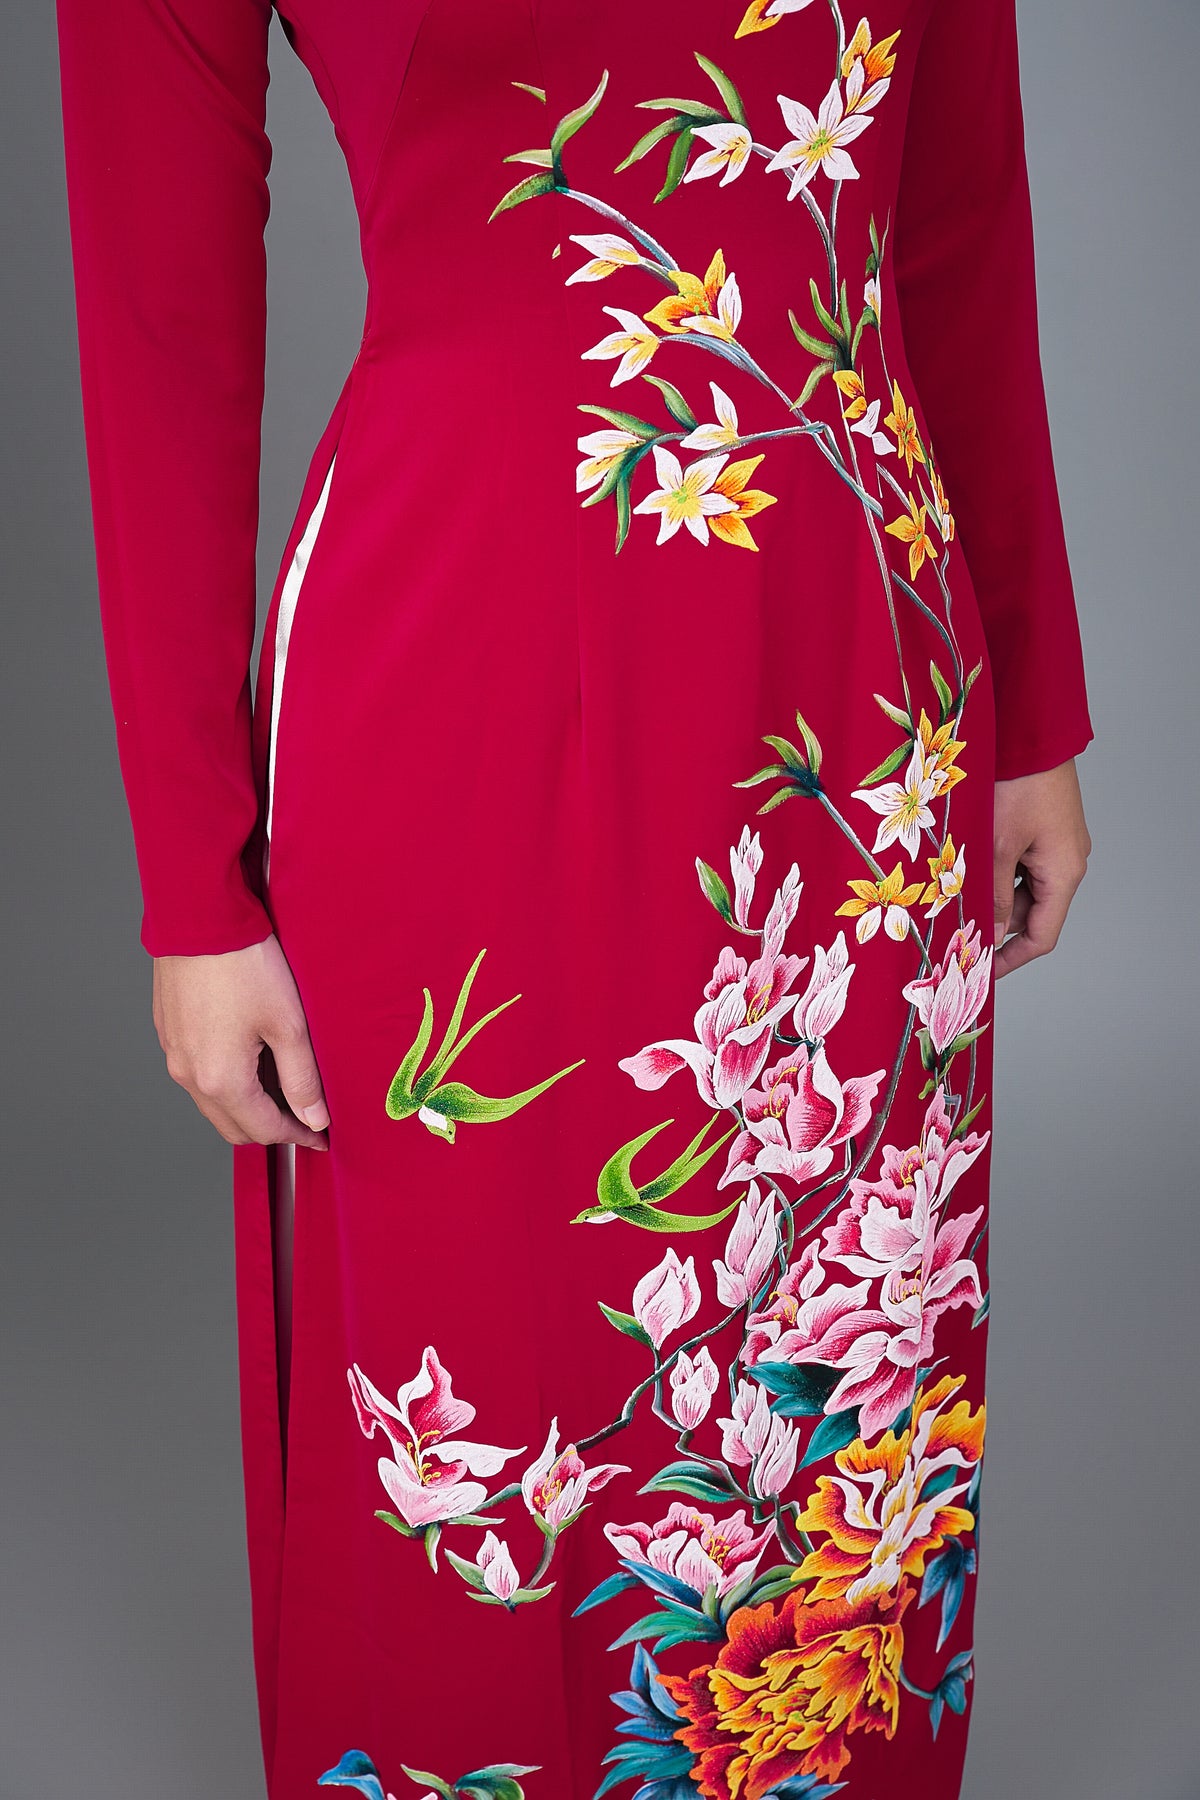 Made to measure ao dai. Hand-painted, floral motif on red silk - Mark ...